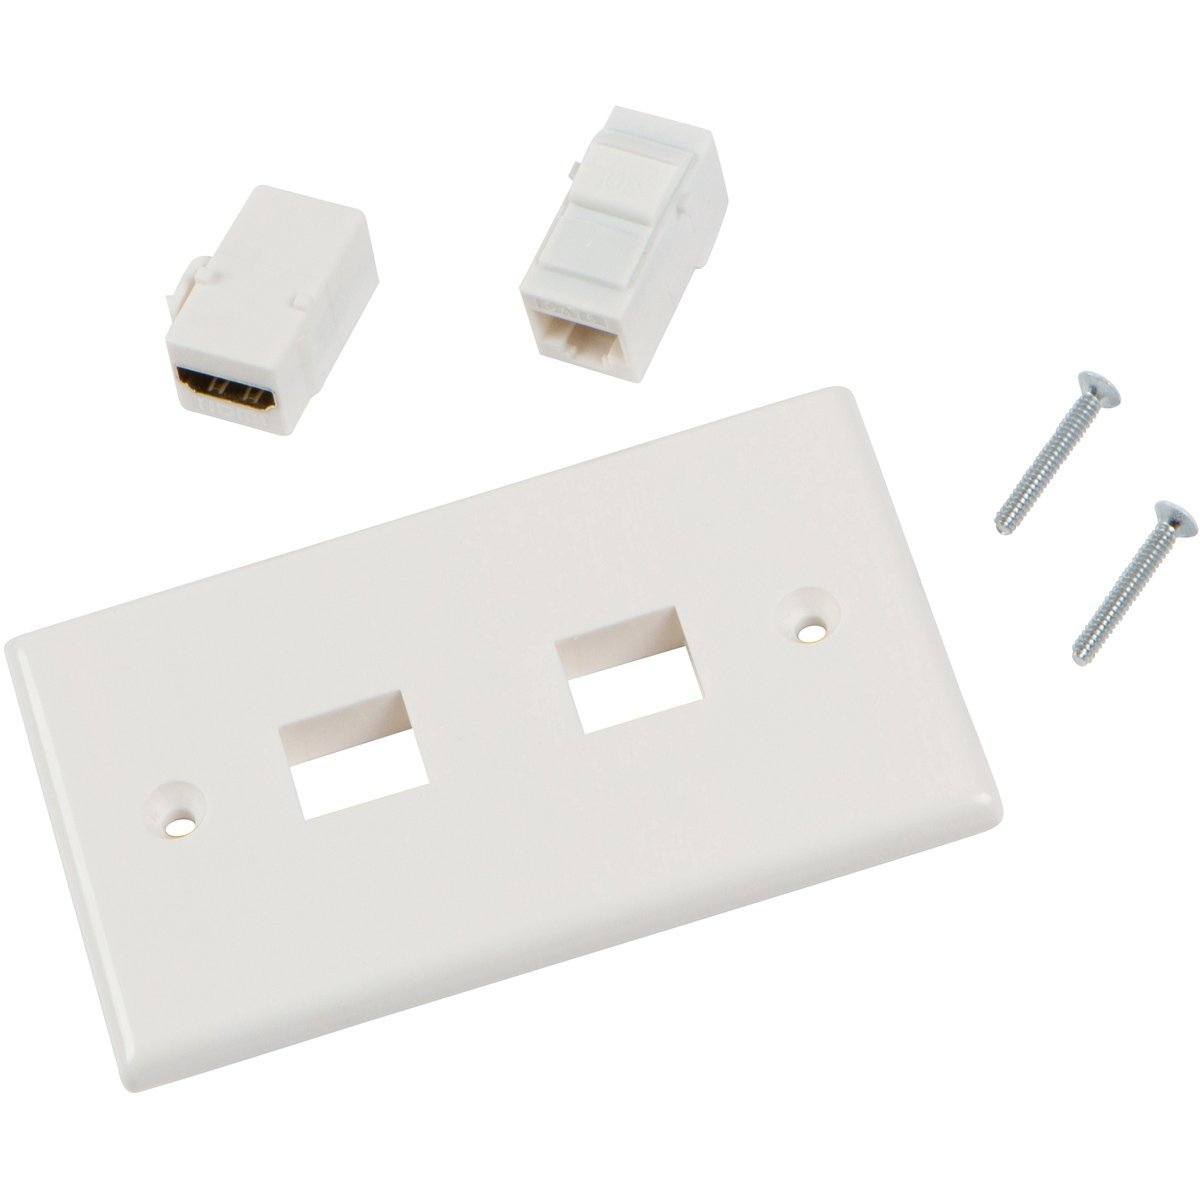 Buyer's Point HDMI and Cat6 Ethernet RJ45 Wall Plate UL Listed 5, White 